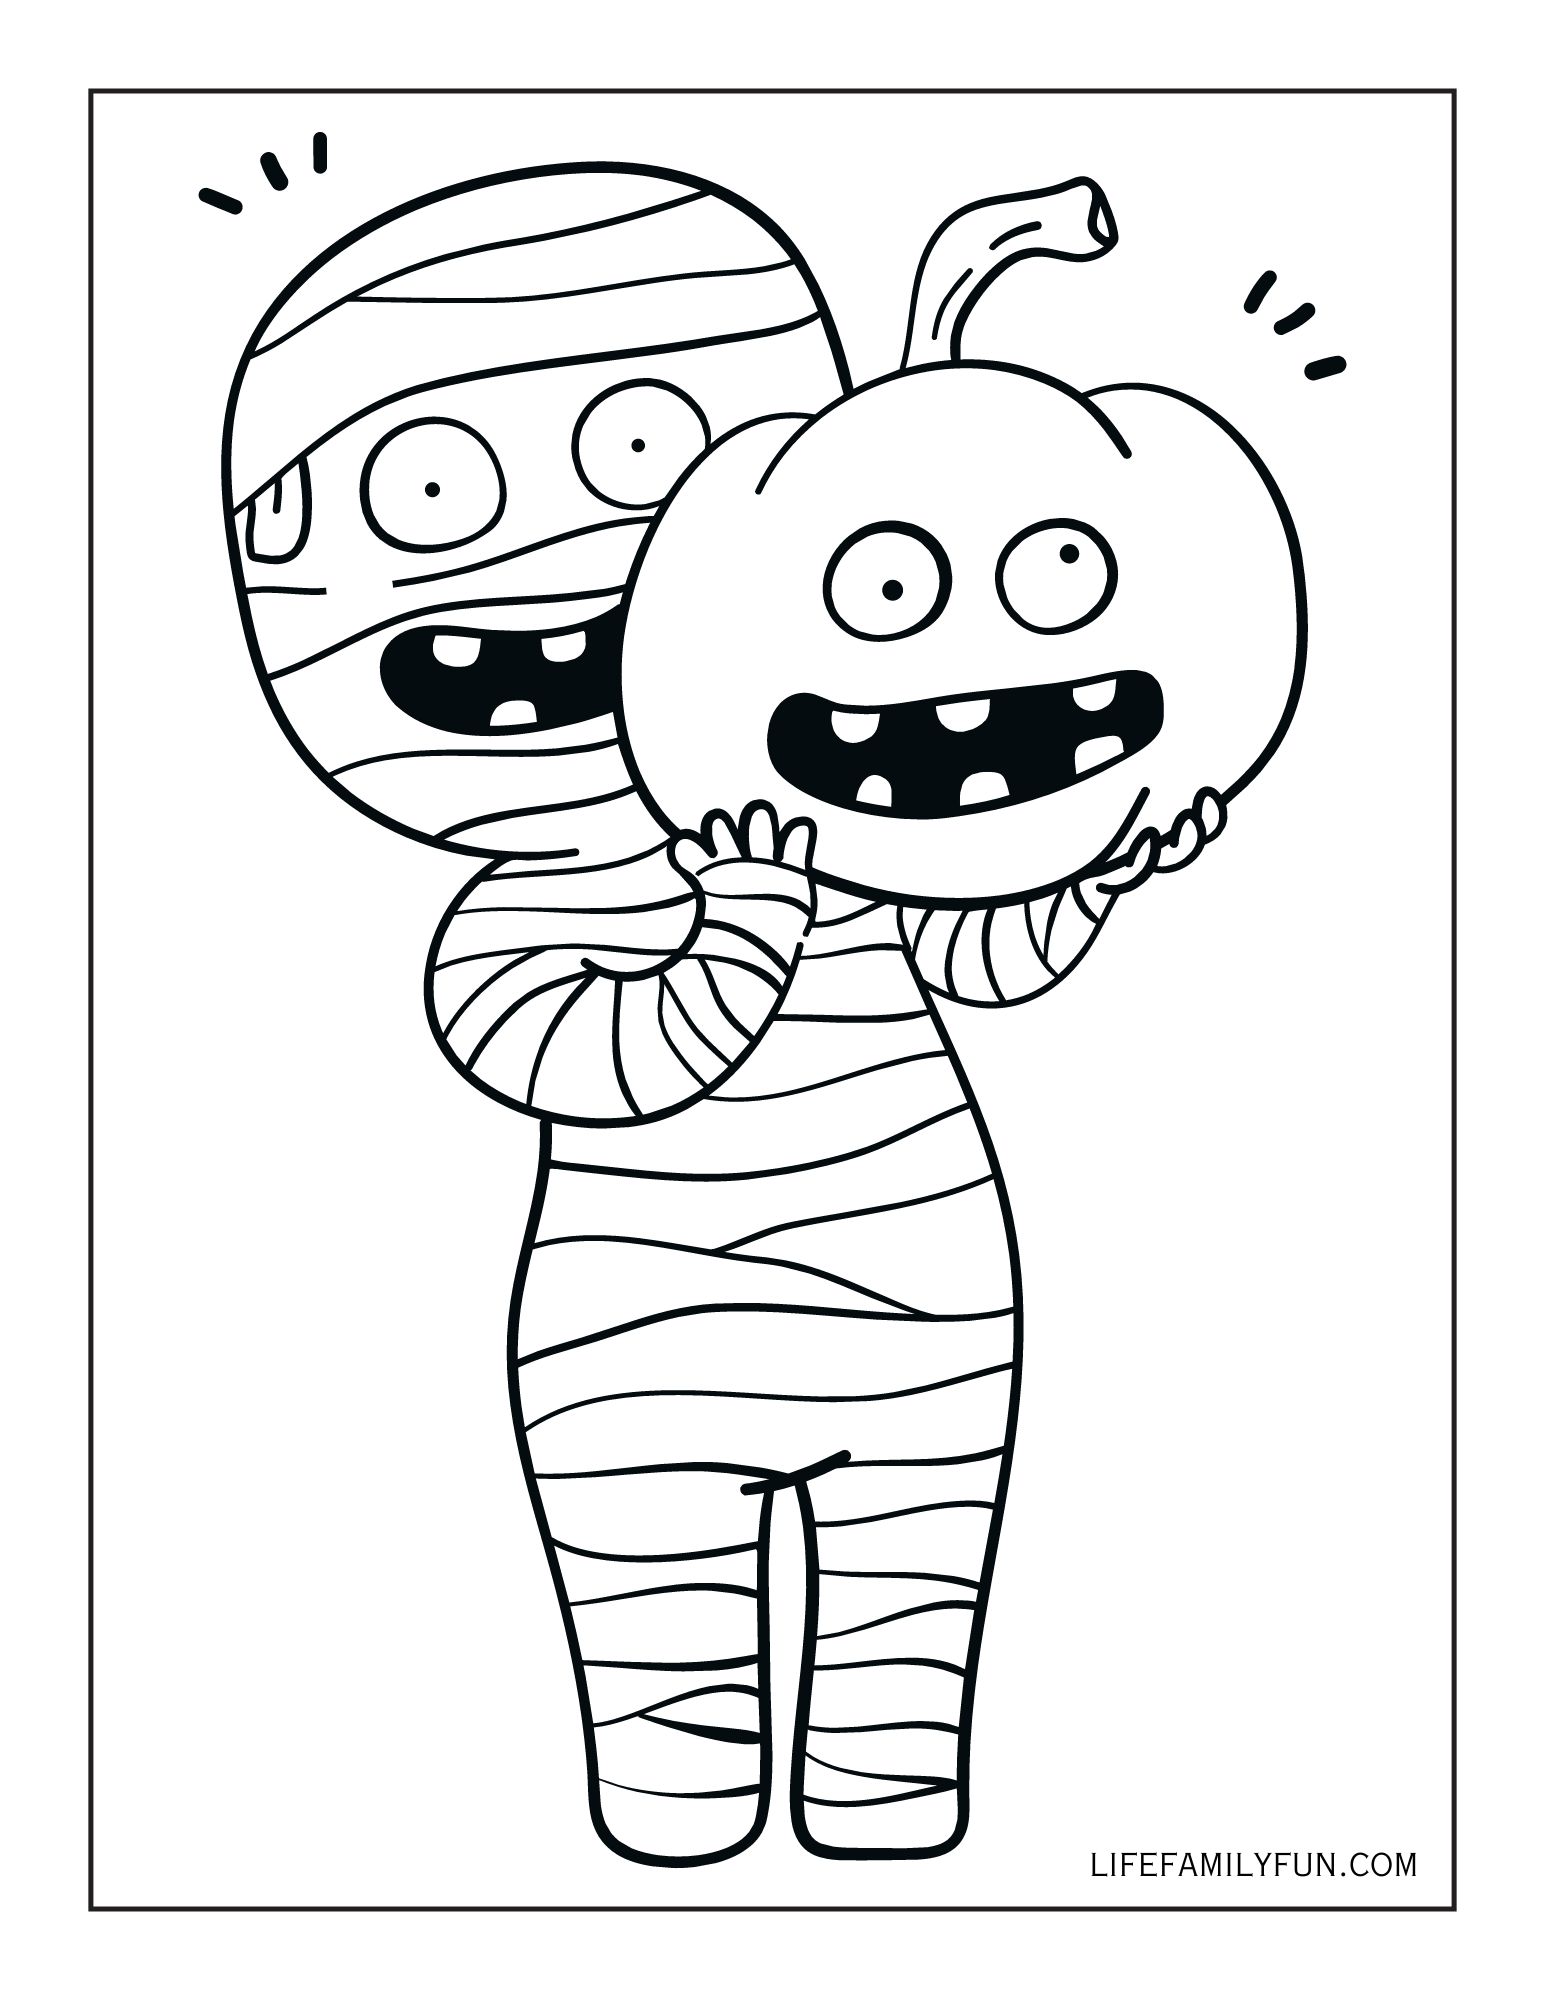 mummy patch halloween coloring page with pumpkin head